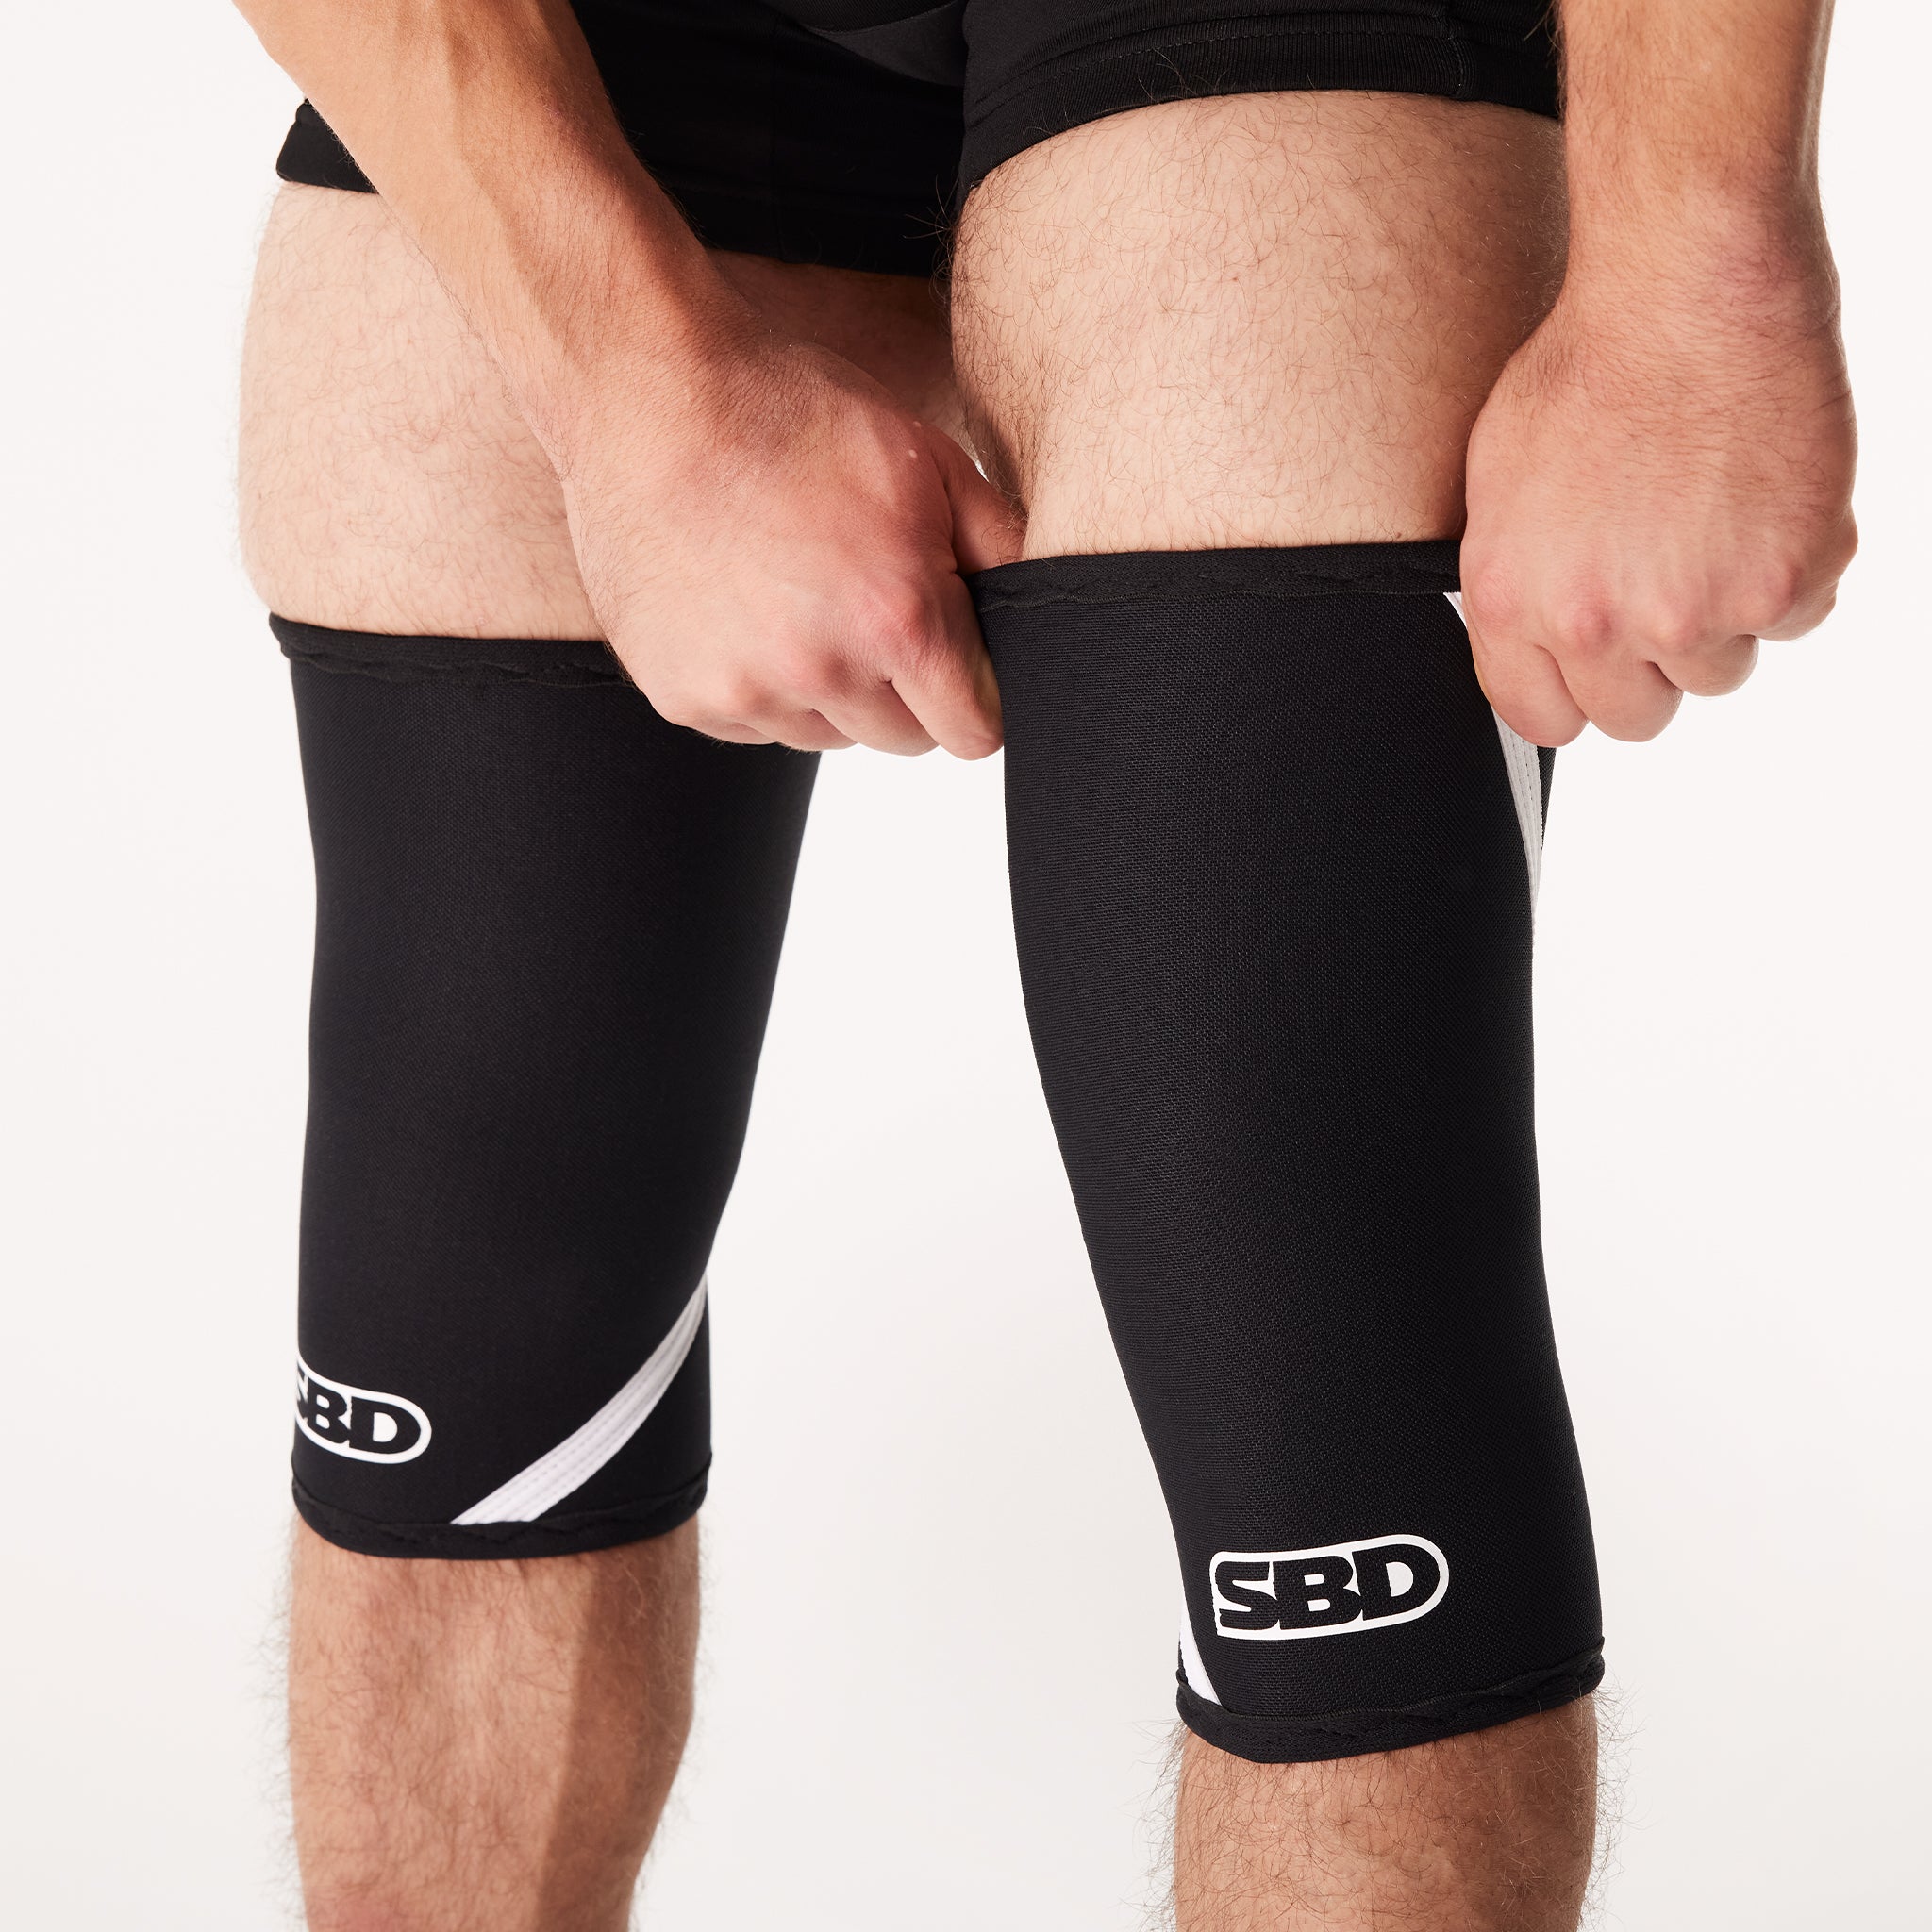 SBD Knee Sleeves 7MM MOMENTUM Limited Edition